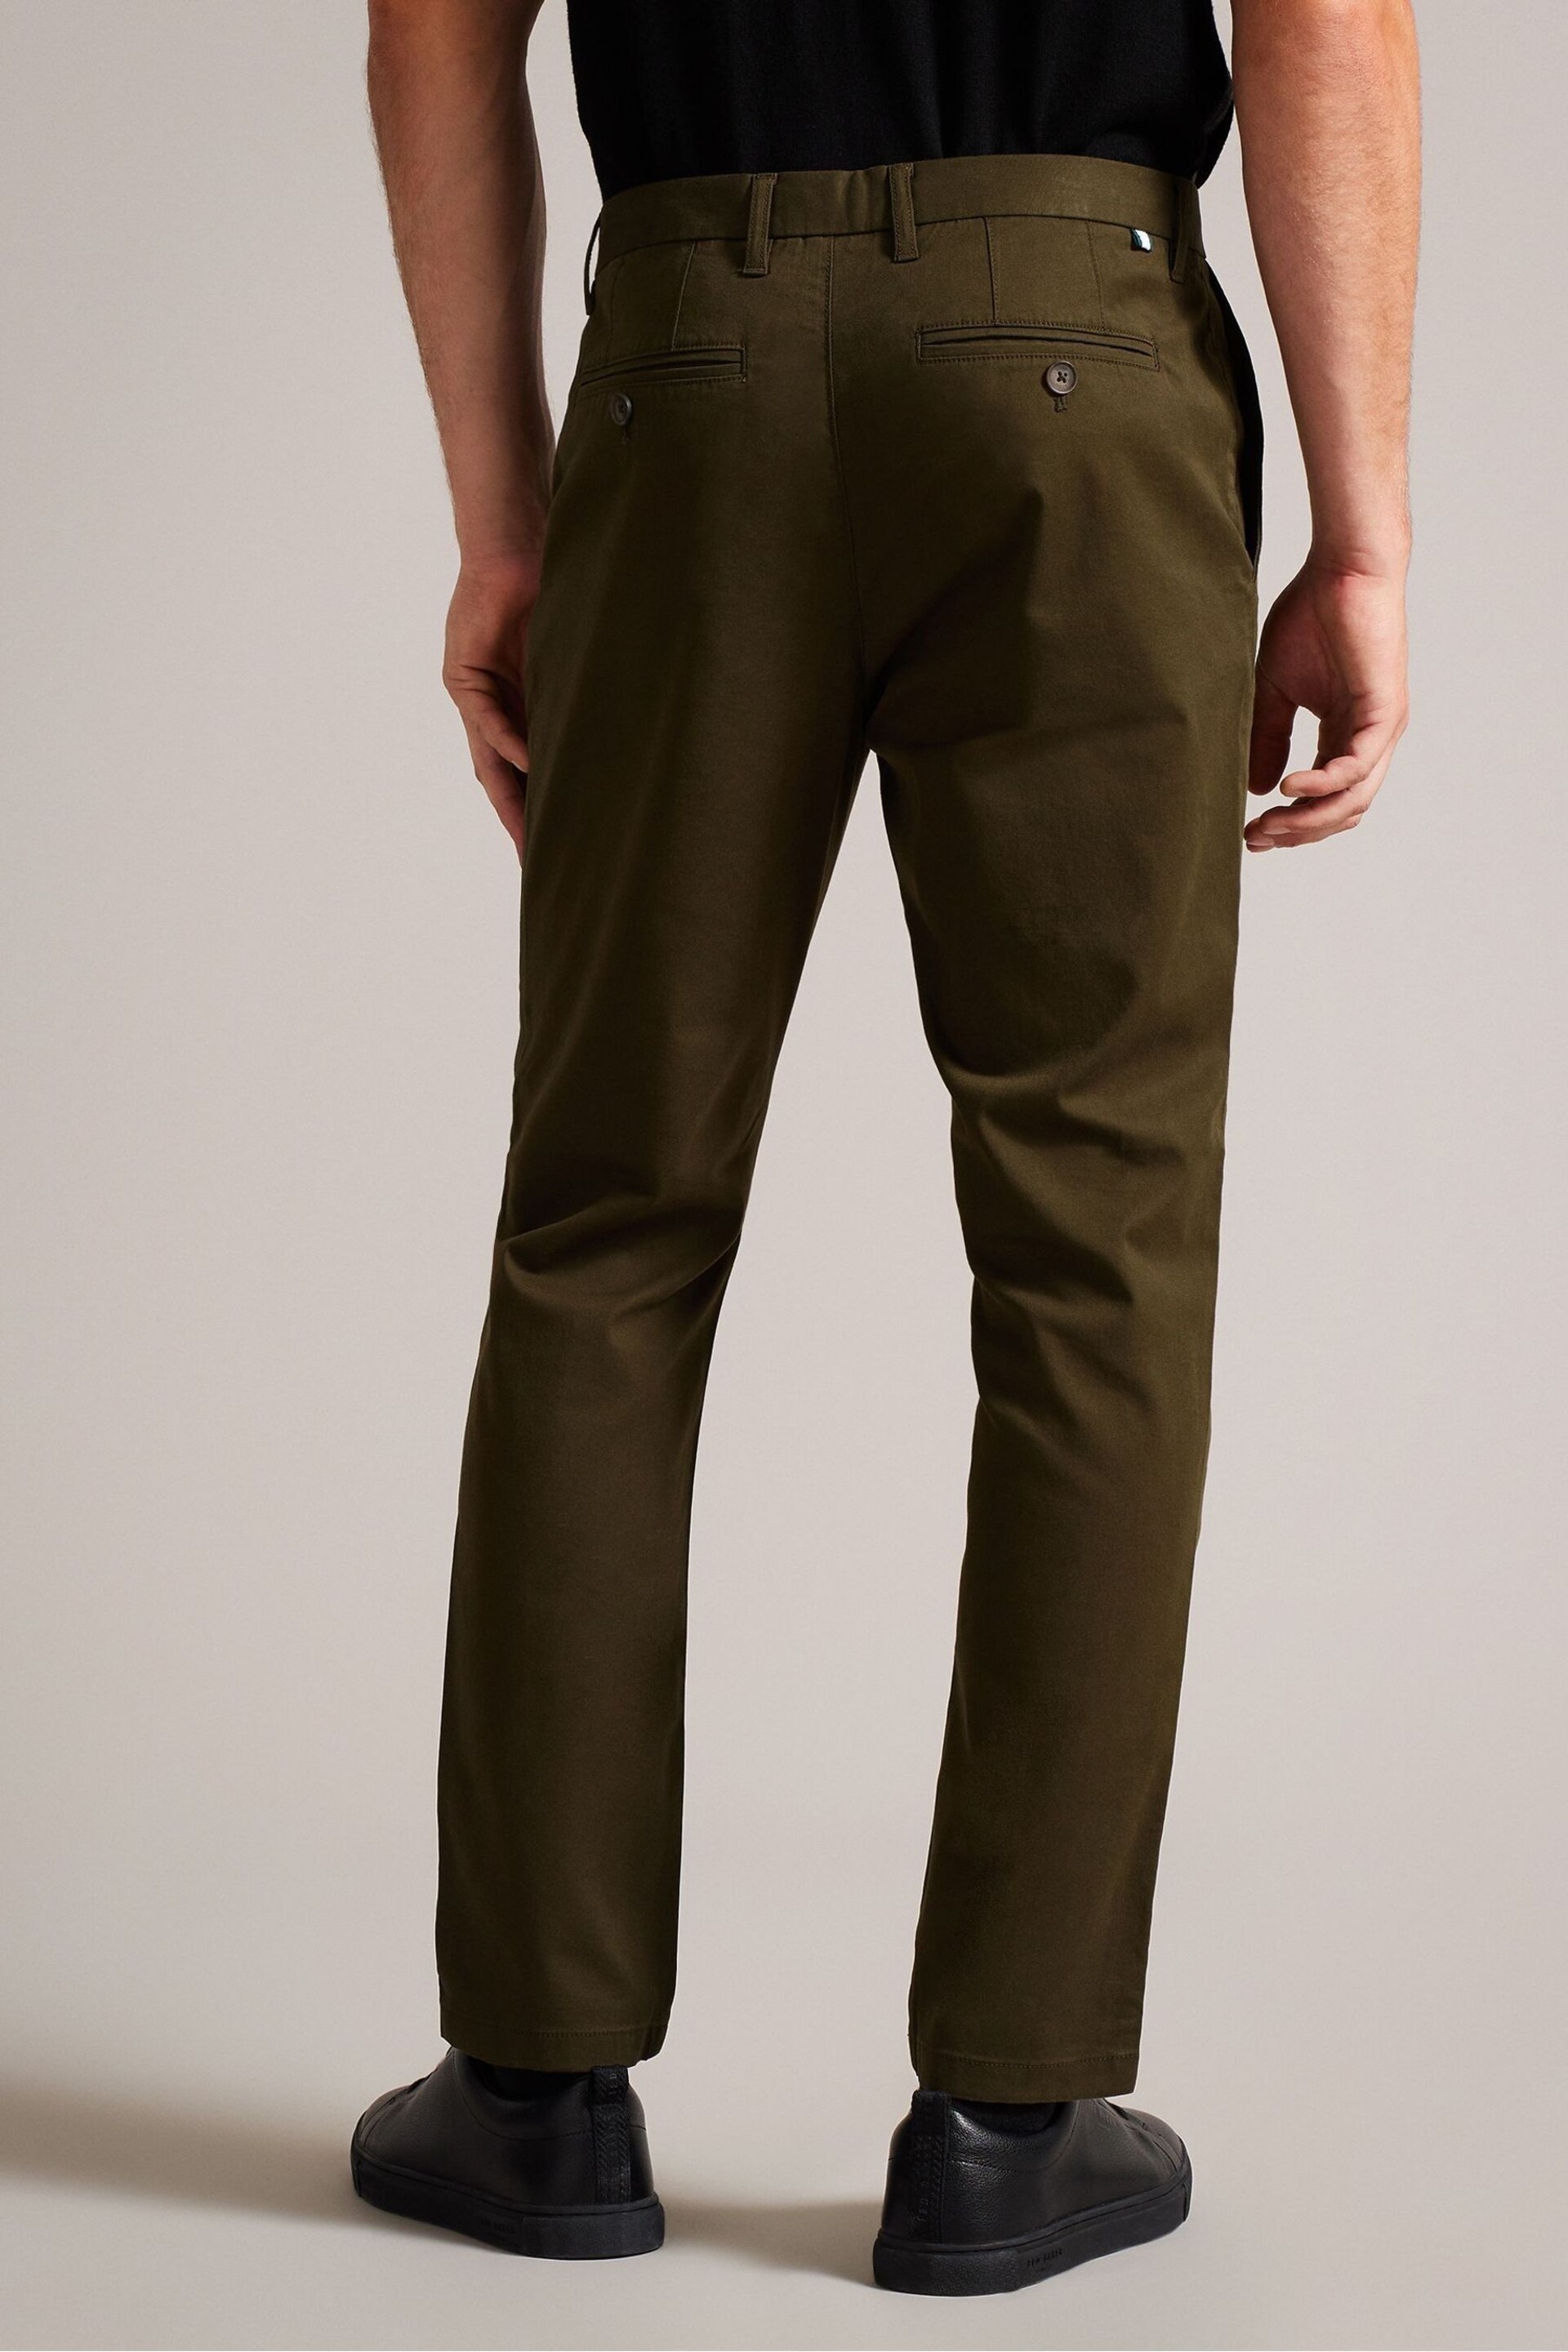 Ted Baker Green Slim Fit Textured Chino Trousers - Image 2 of 5